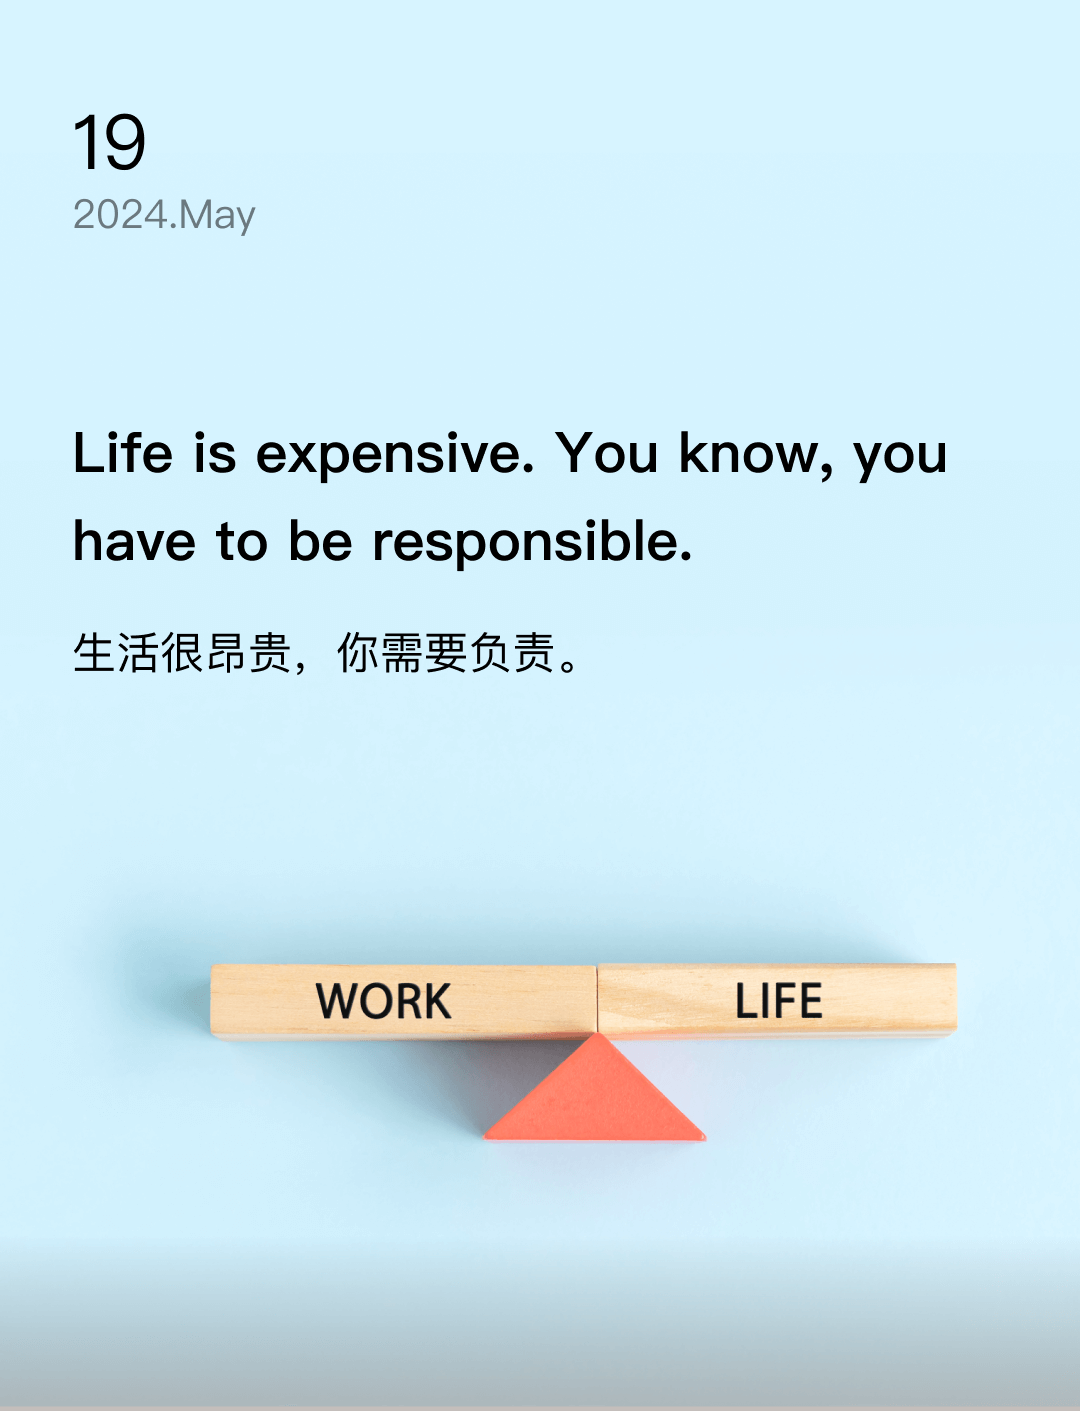 Life is expensive. You know, you have to be responsible.